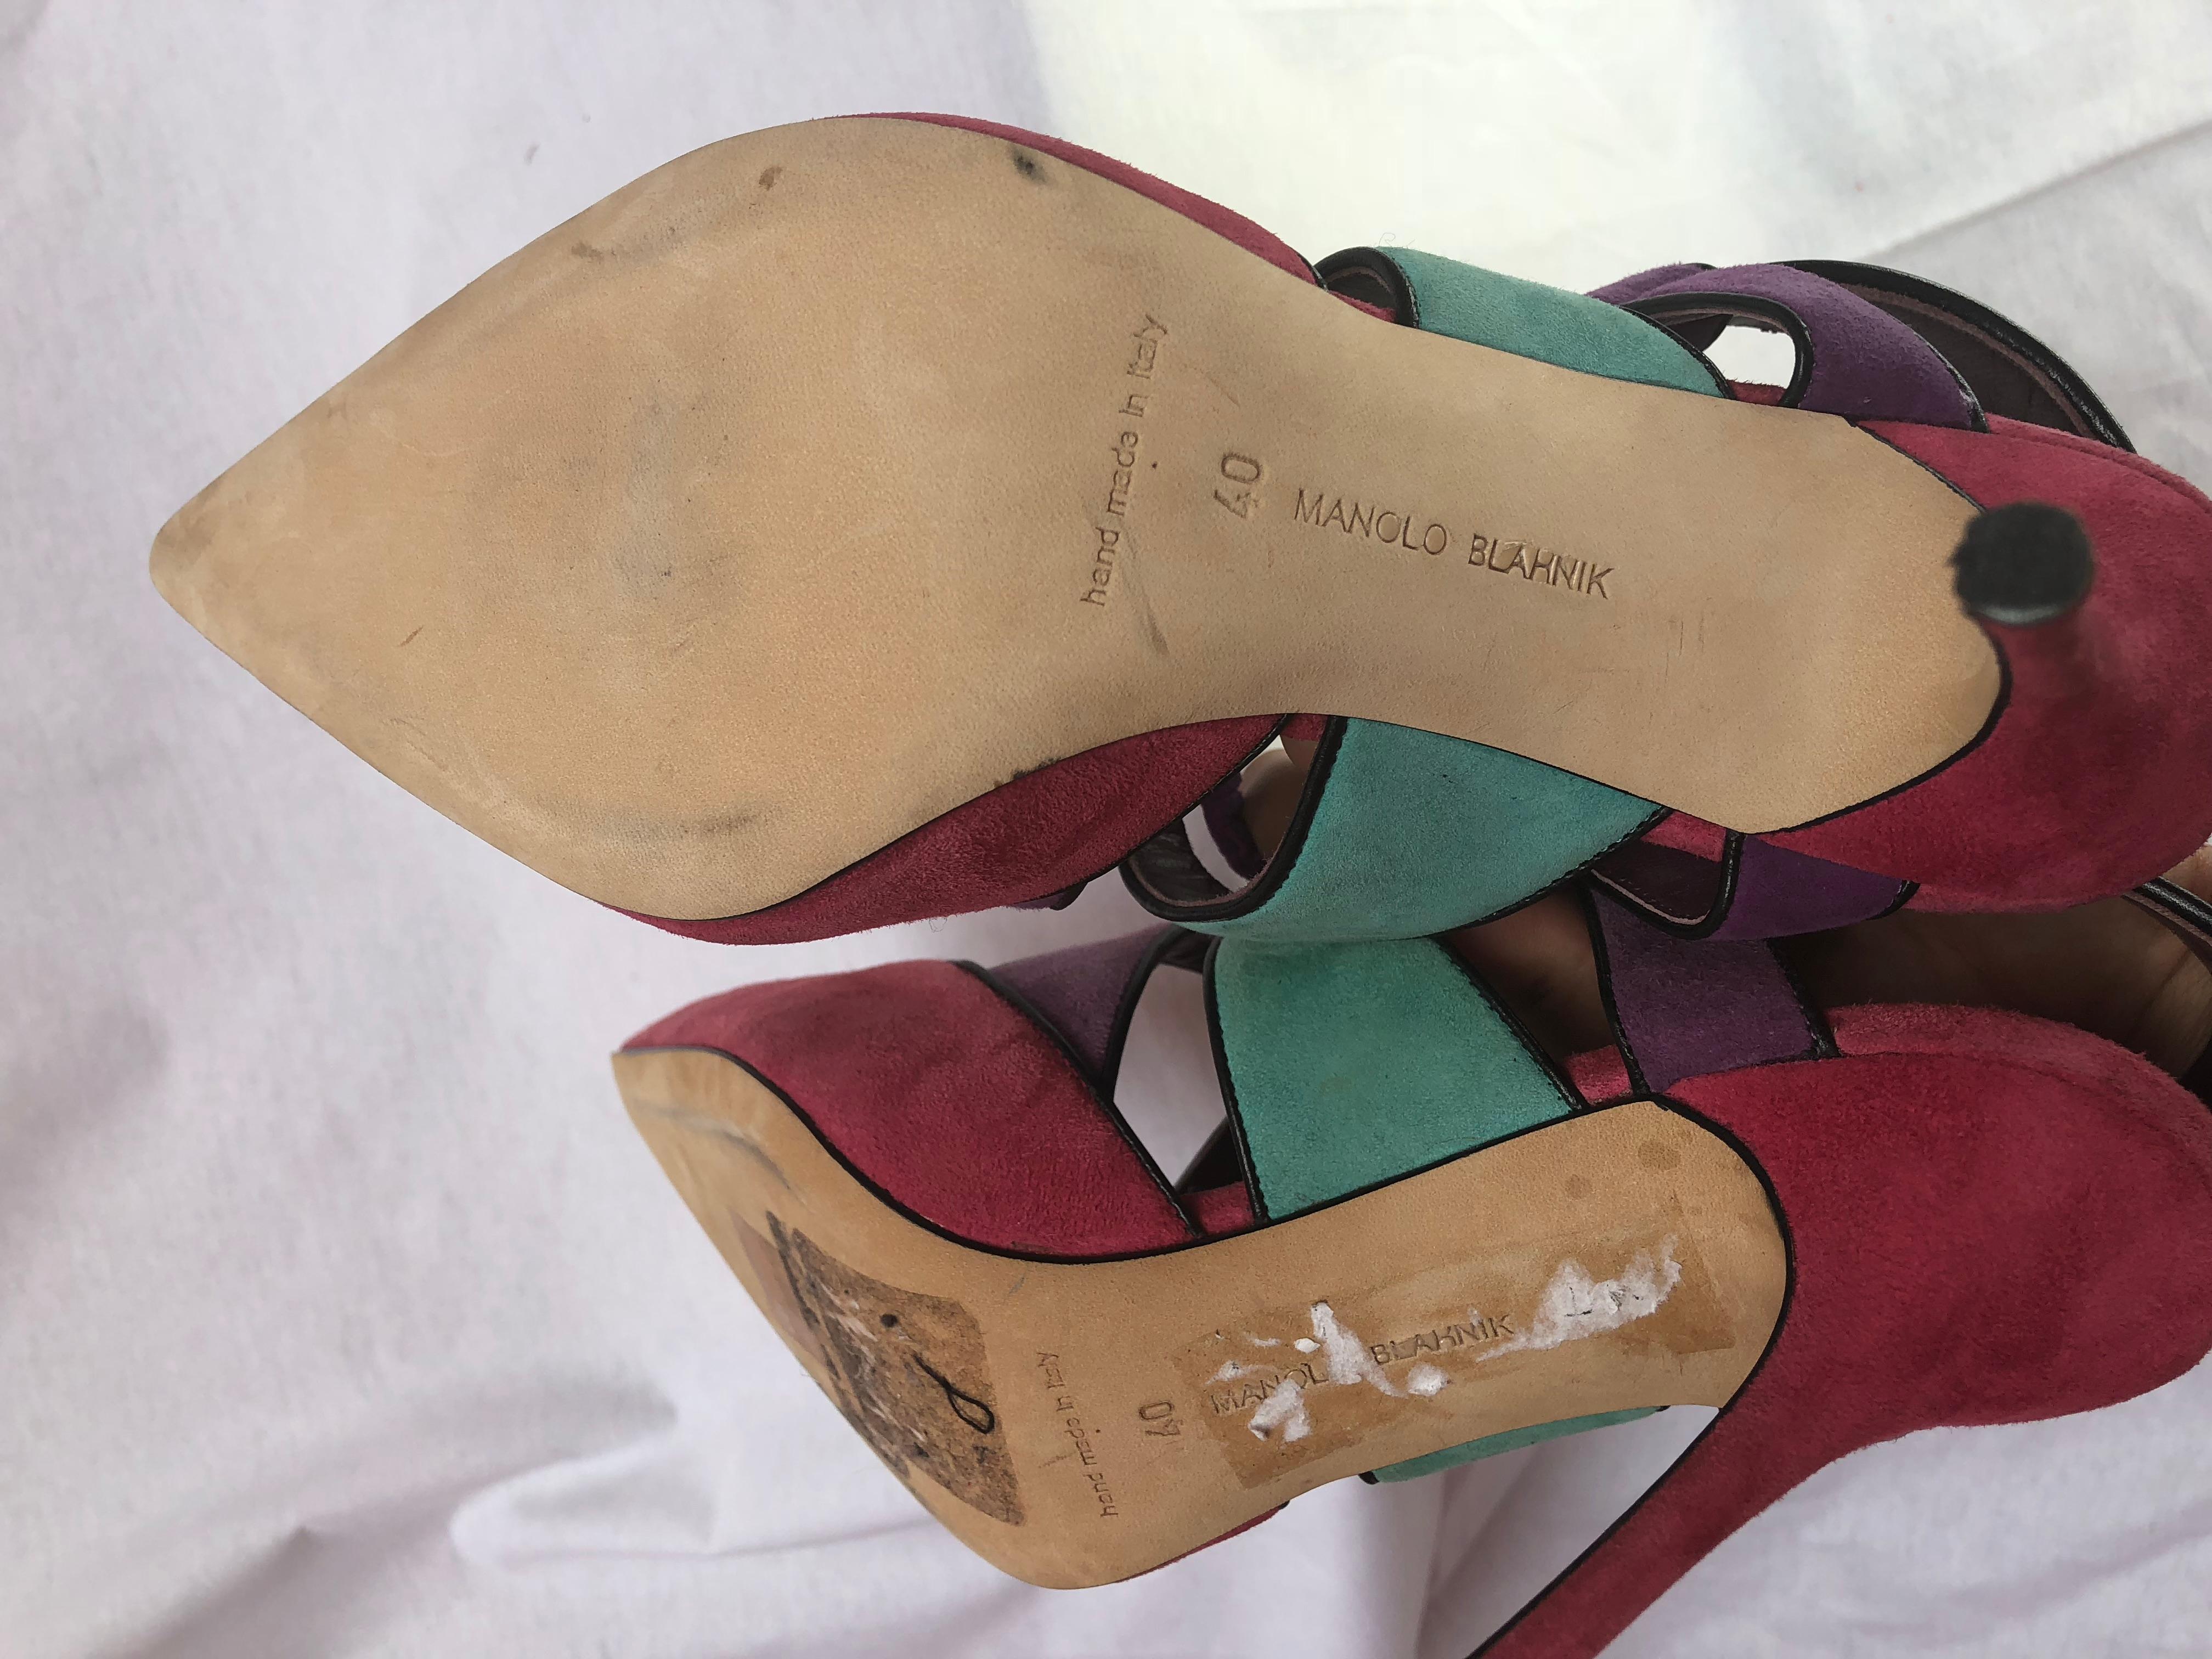 Vintage 1990s Manolo Blahnik Multi-color Pumps Size 40 In New Condition For Sale In Thousand Oaks, CA